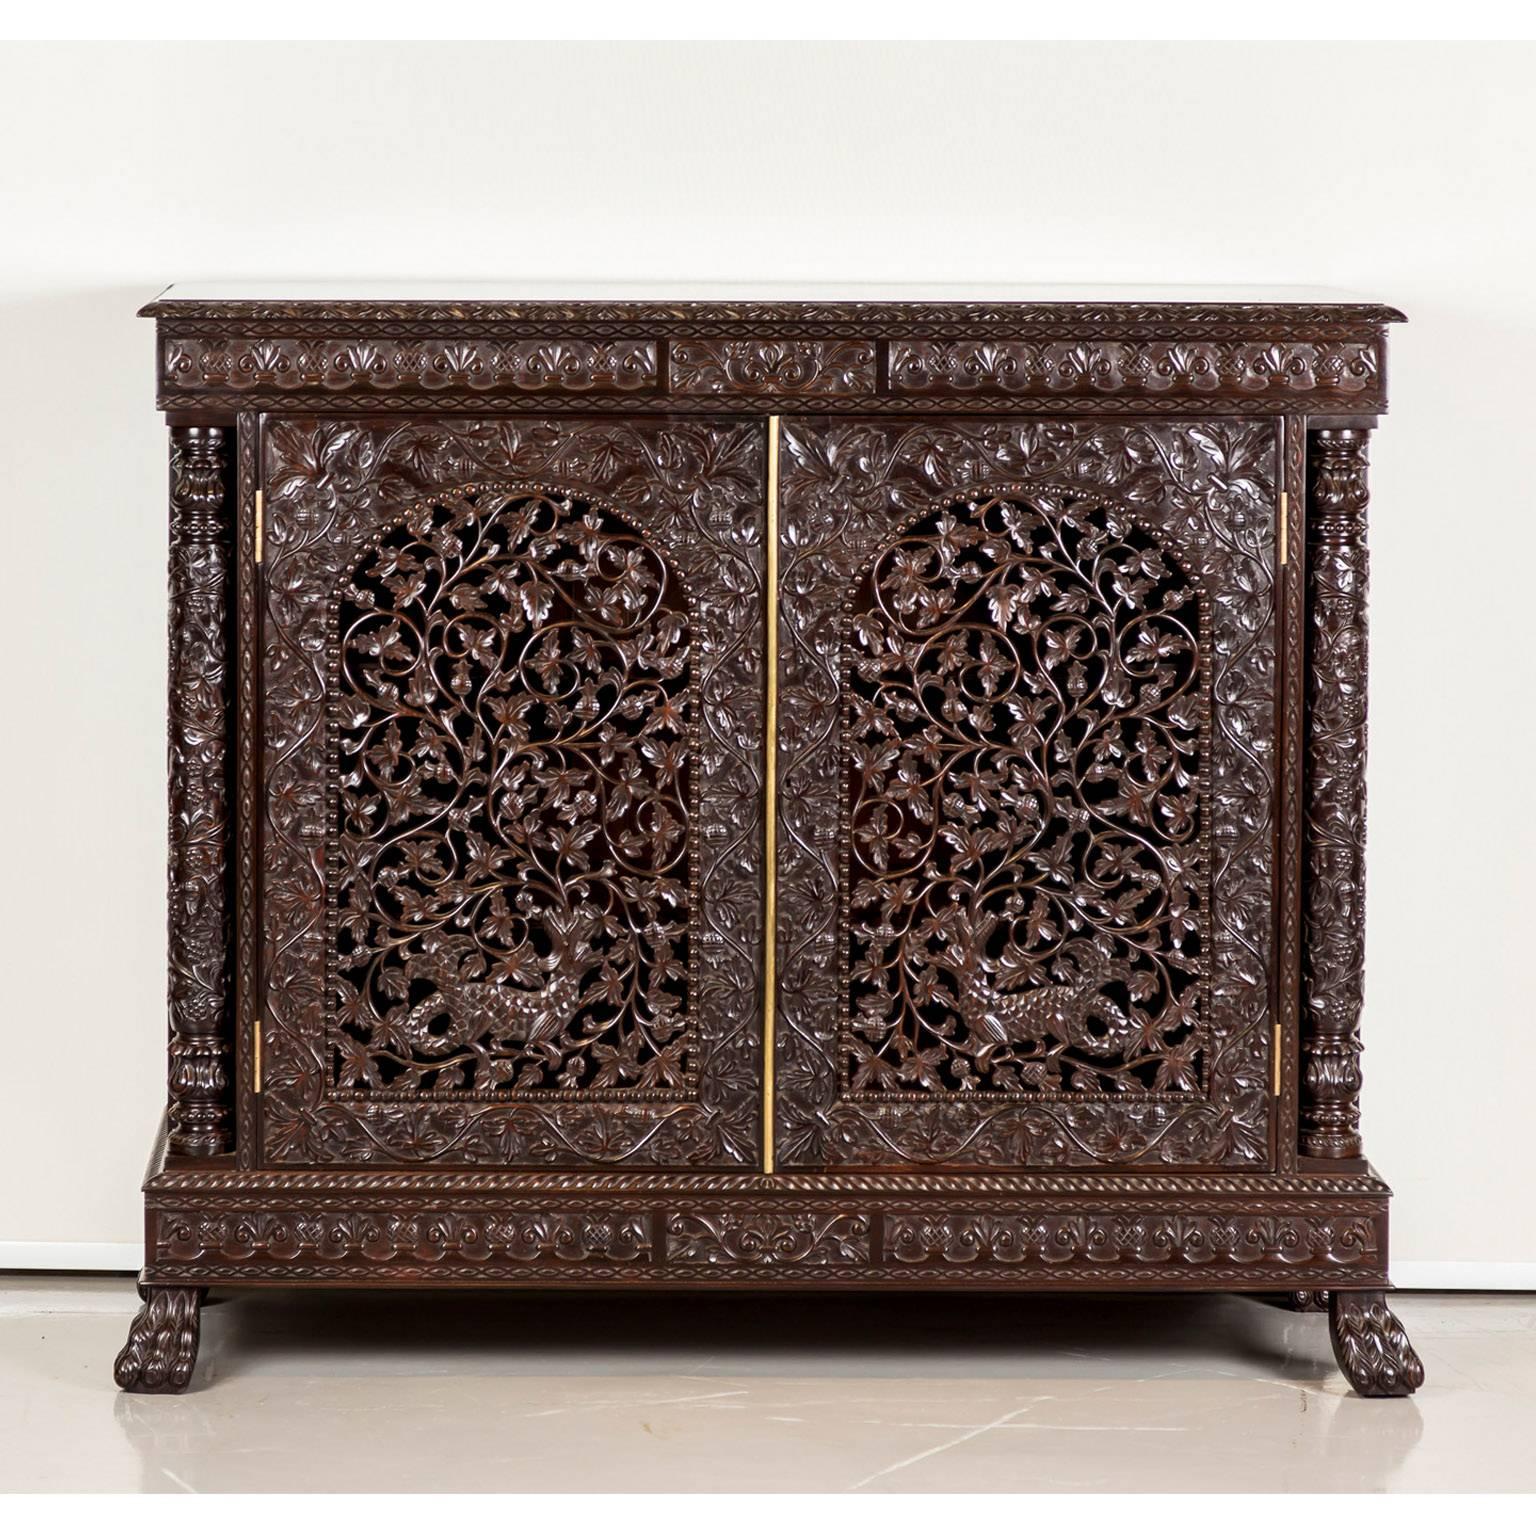 A beautifully carved British colonial cabinet in rosewood. The overhanging top is made of one piece of rosewood with a carved border. The front is mounted with hinged doors that are intricately pierced and relief carved with an intertwining floral